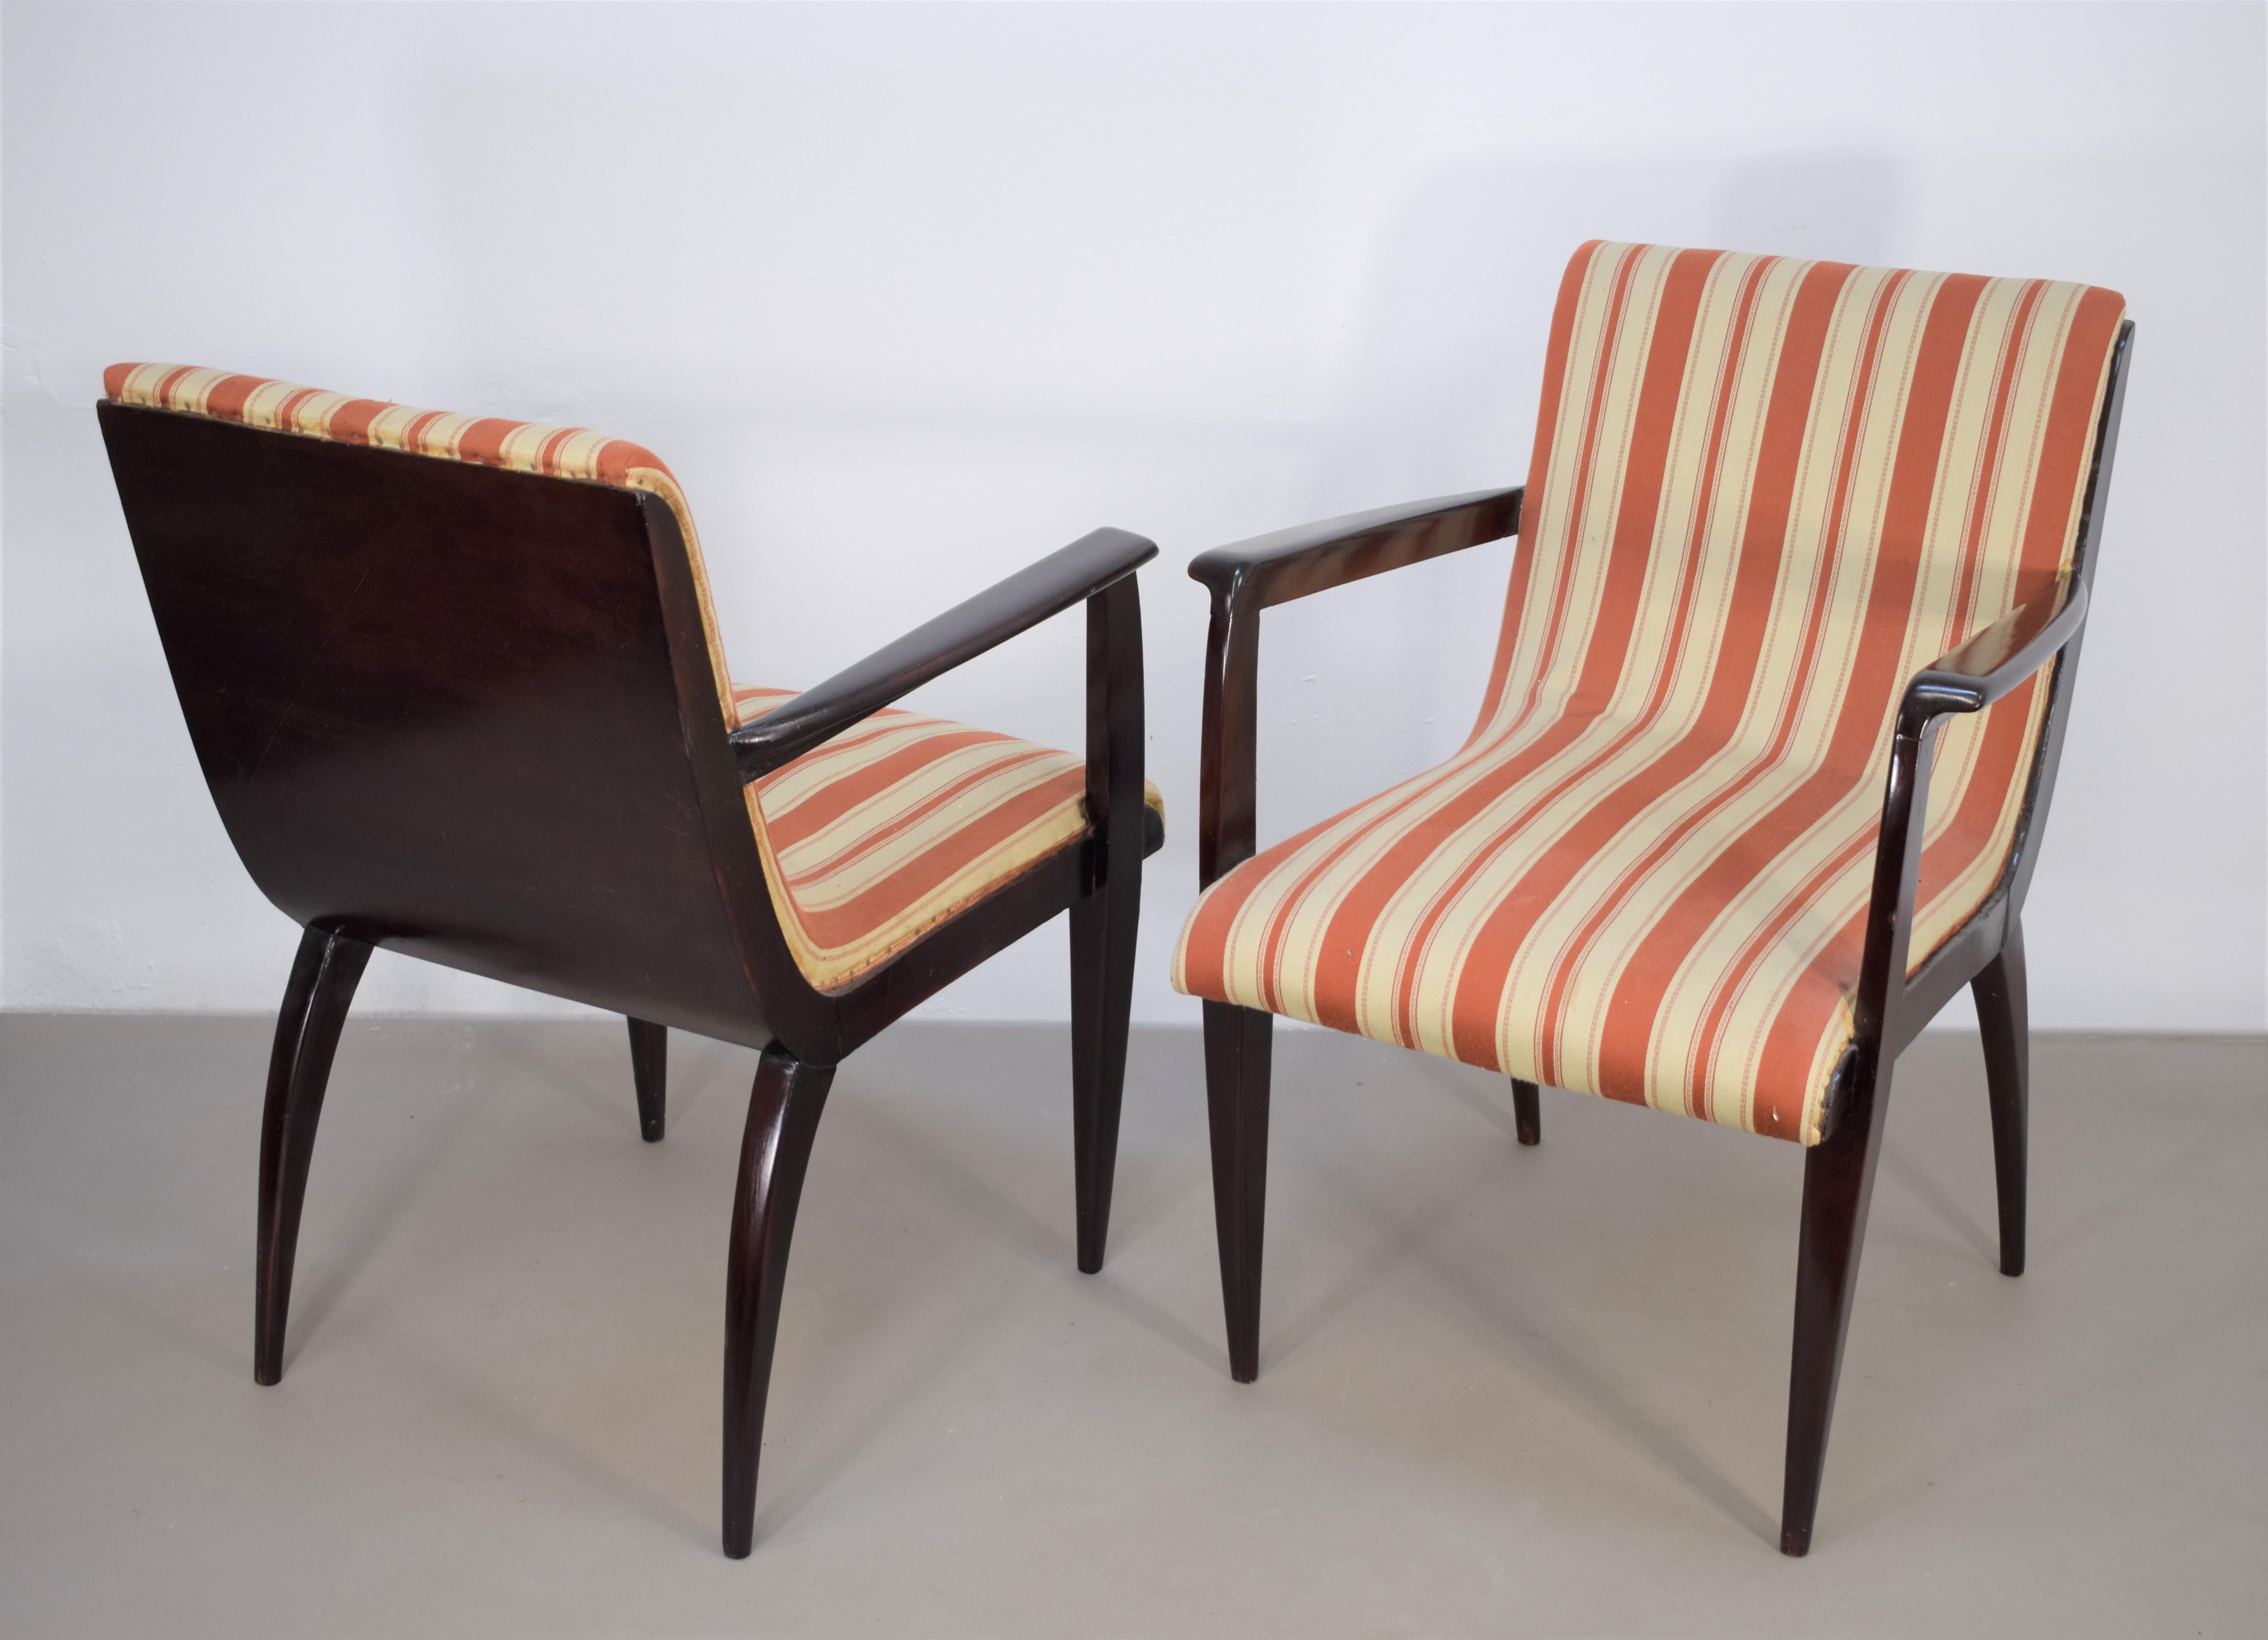 Pair of Italian armchairs attributed to Guglielmo Ulrich, 1950s.

Dimensions: H= 81 cm; W= 64 cm; D= 59 cm; H seat= 42 cm.